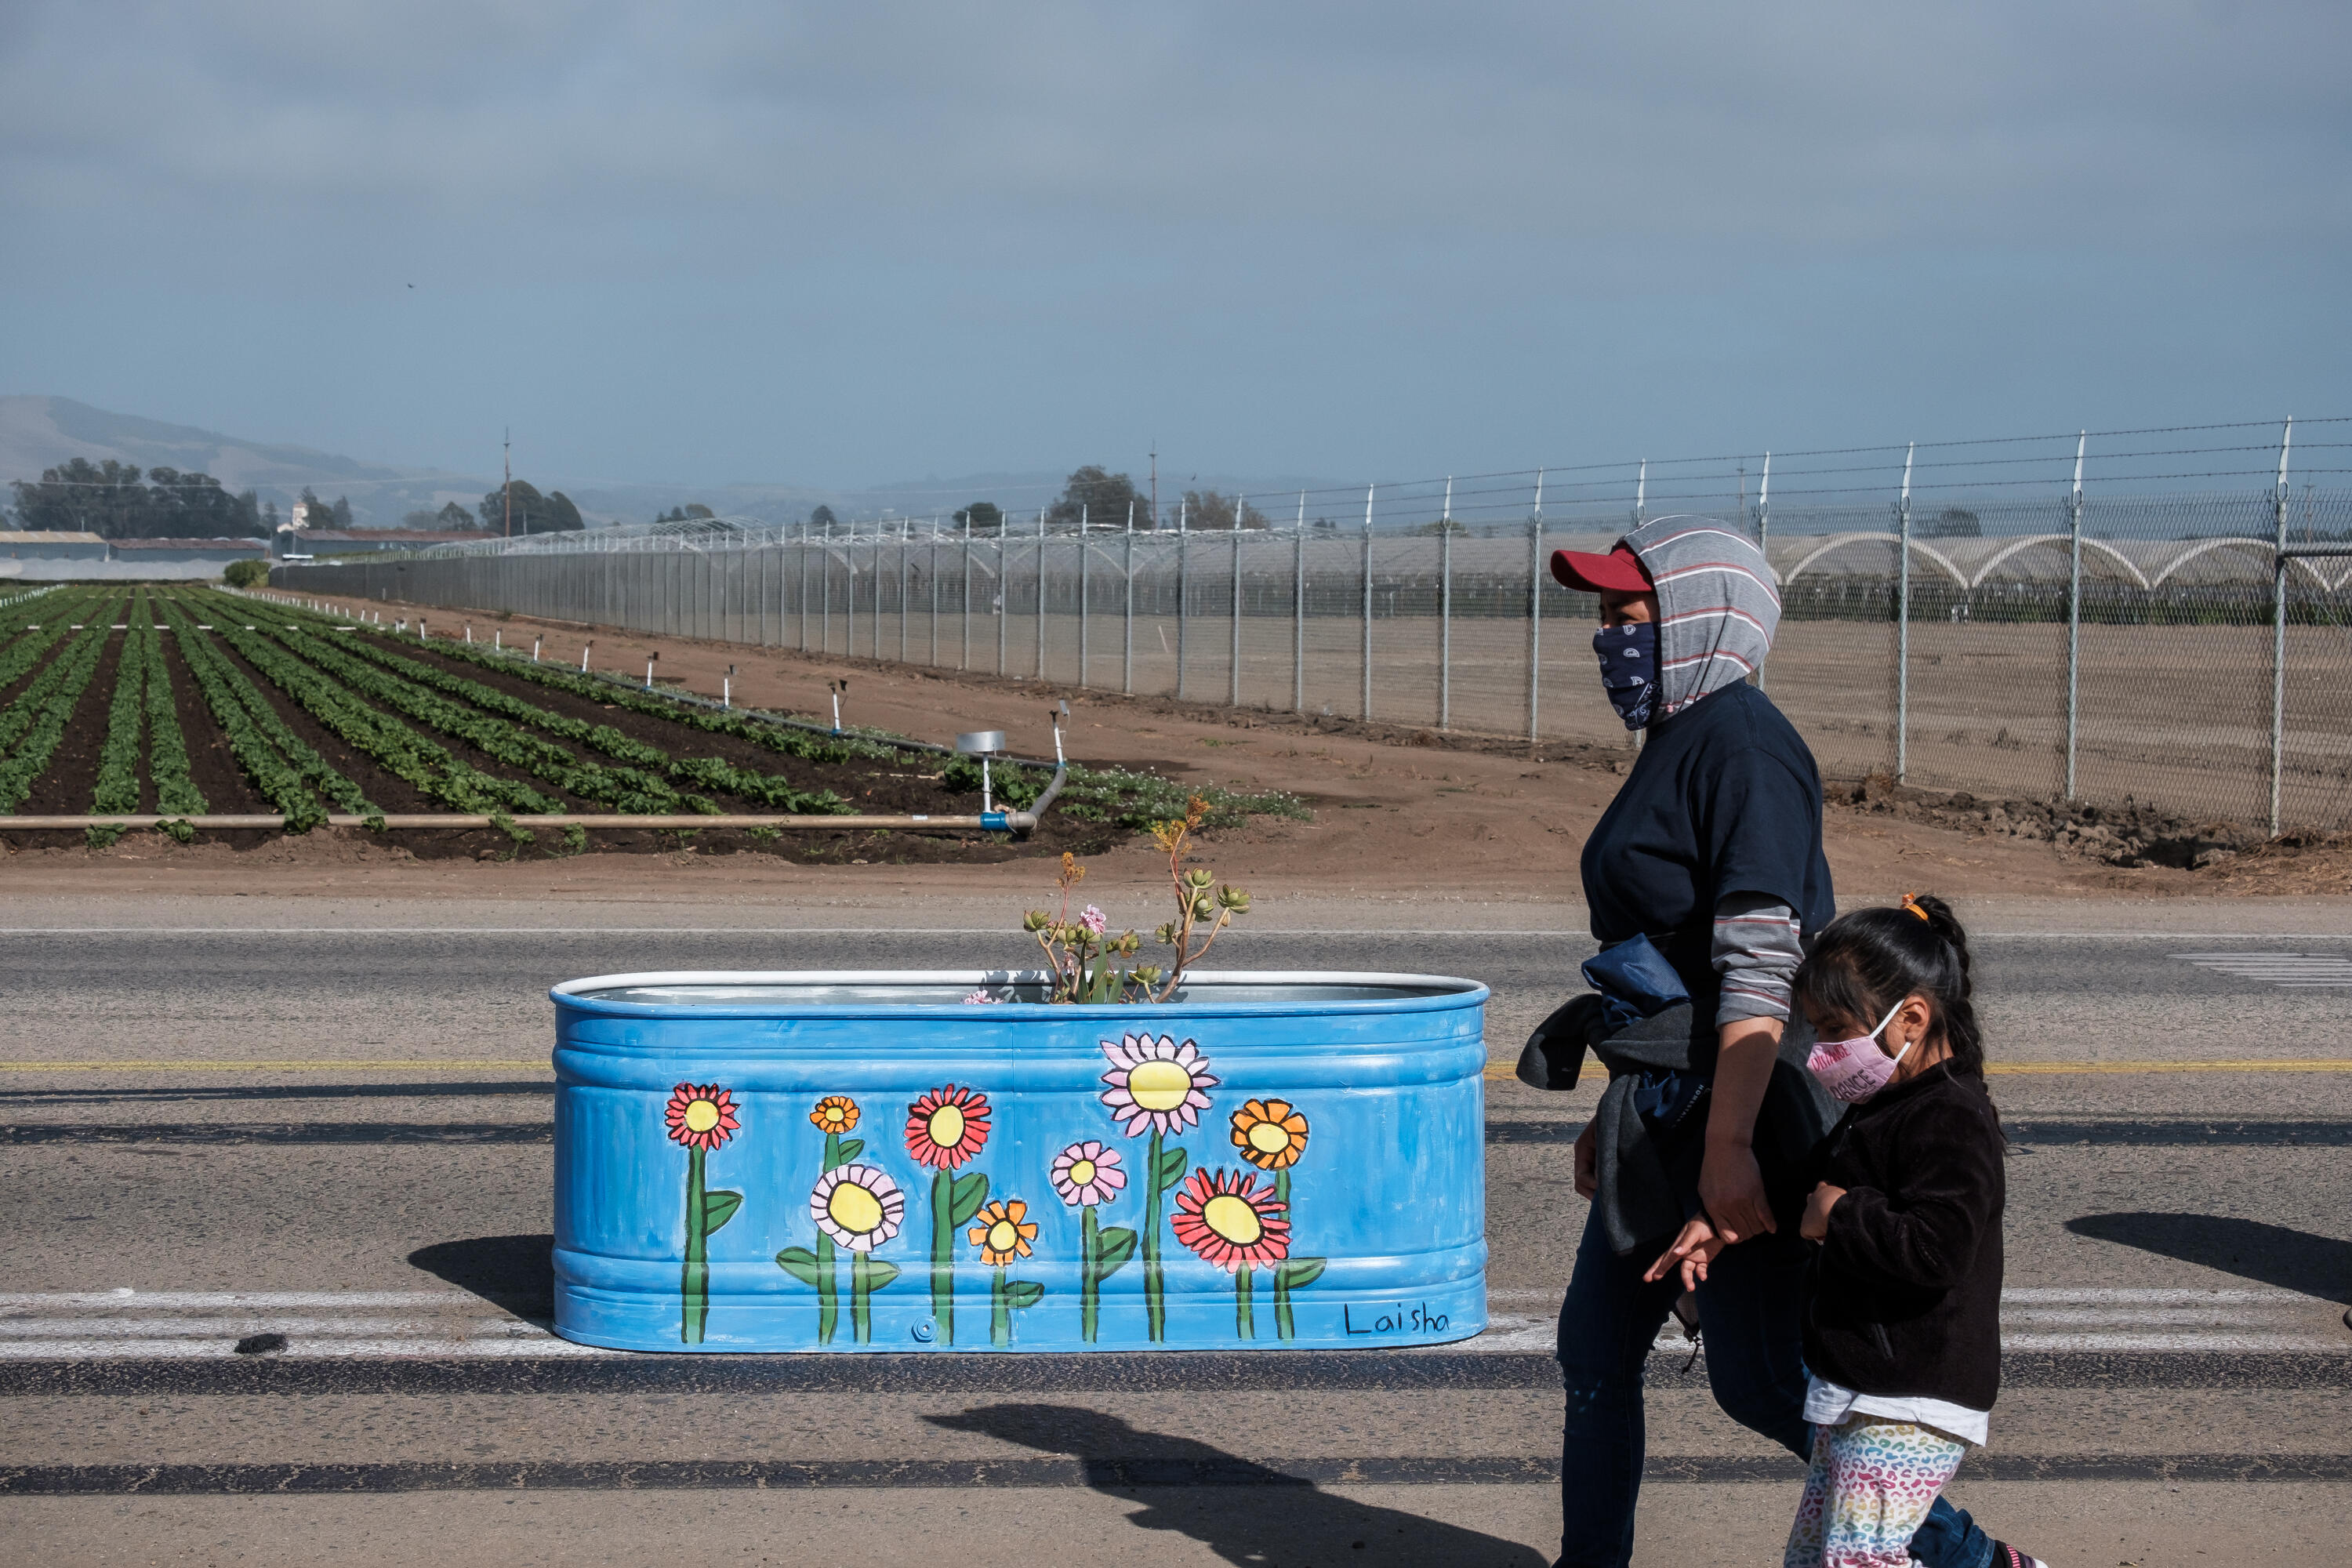 An adult and a kid walk along the Green Valley popup, a painted planter with flowers is behind them and farms are in the background.